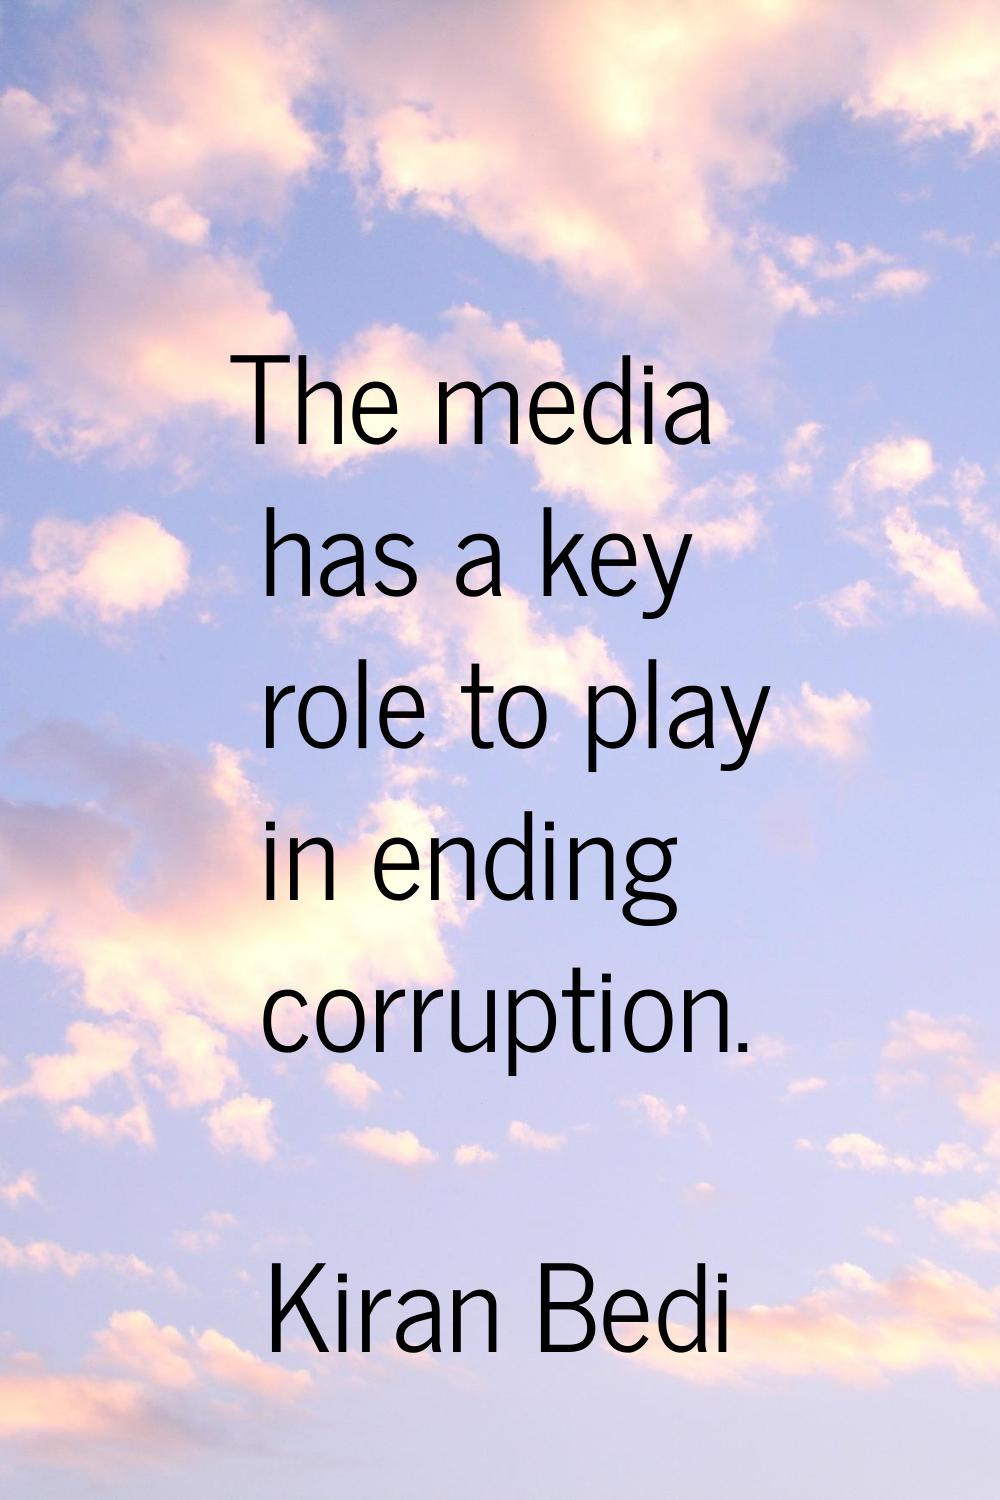 The media has a key role to play in ending corruption.